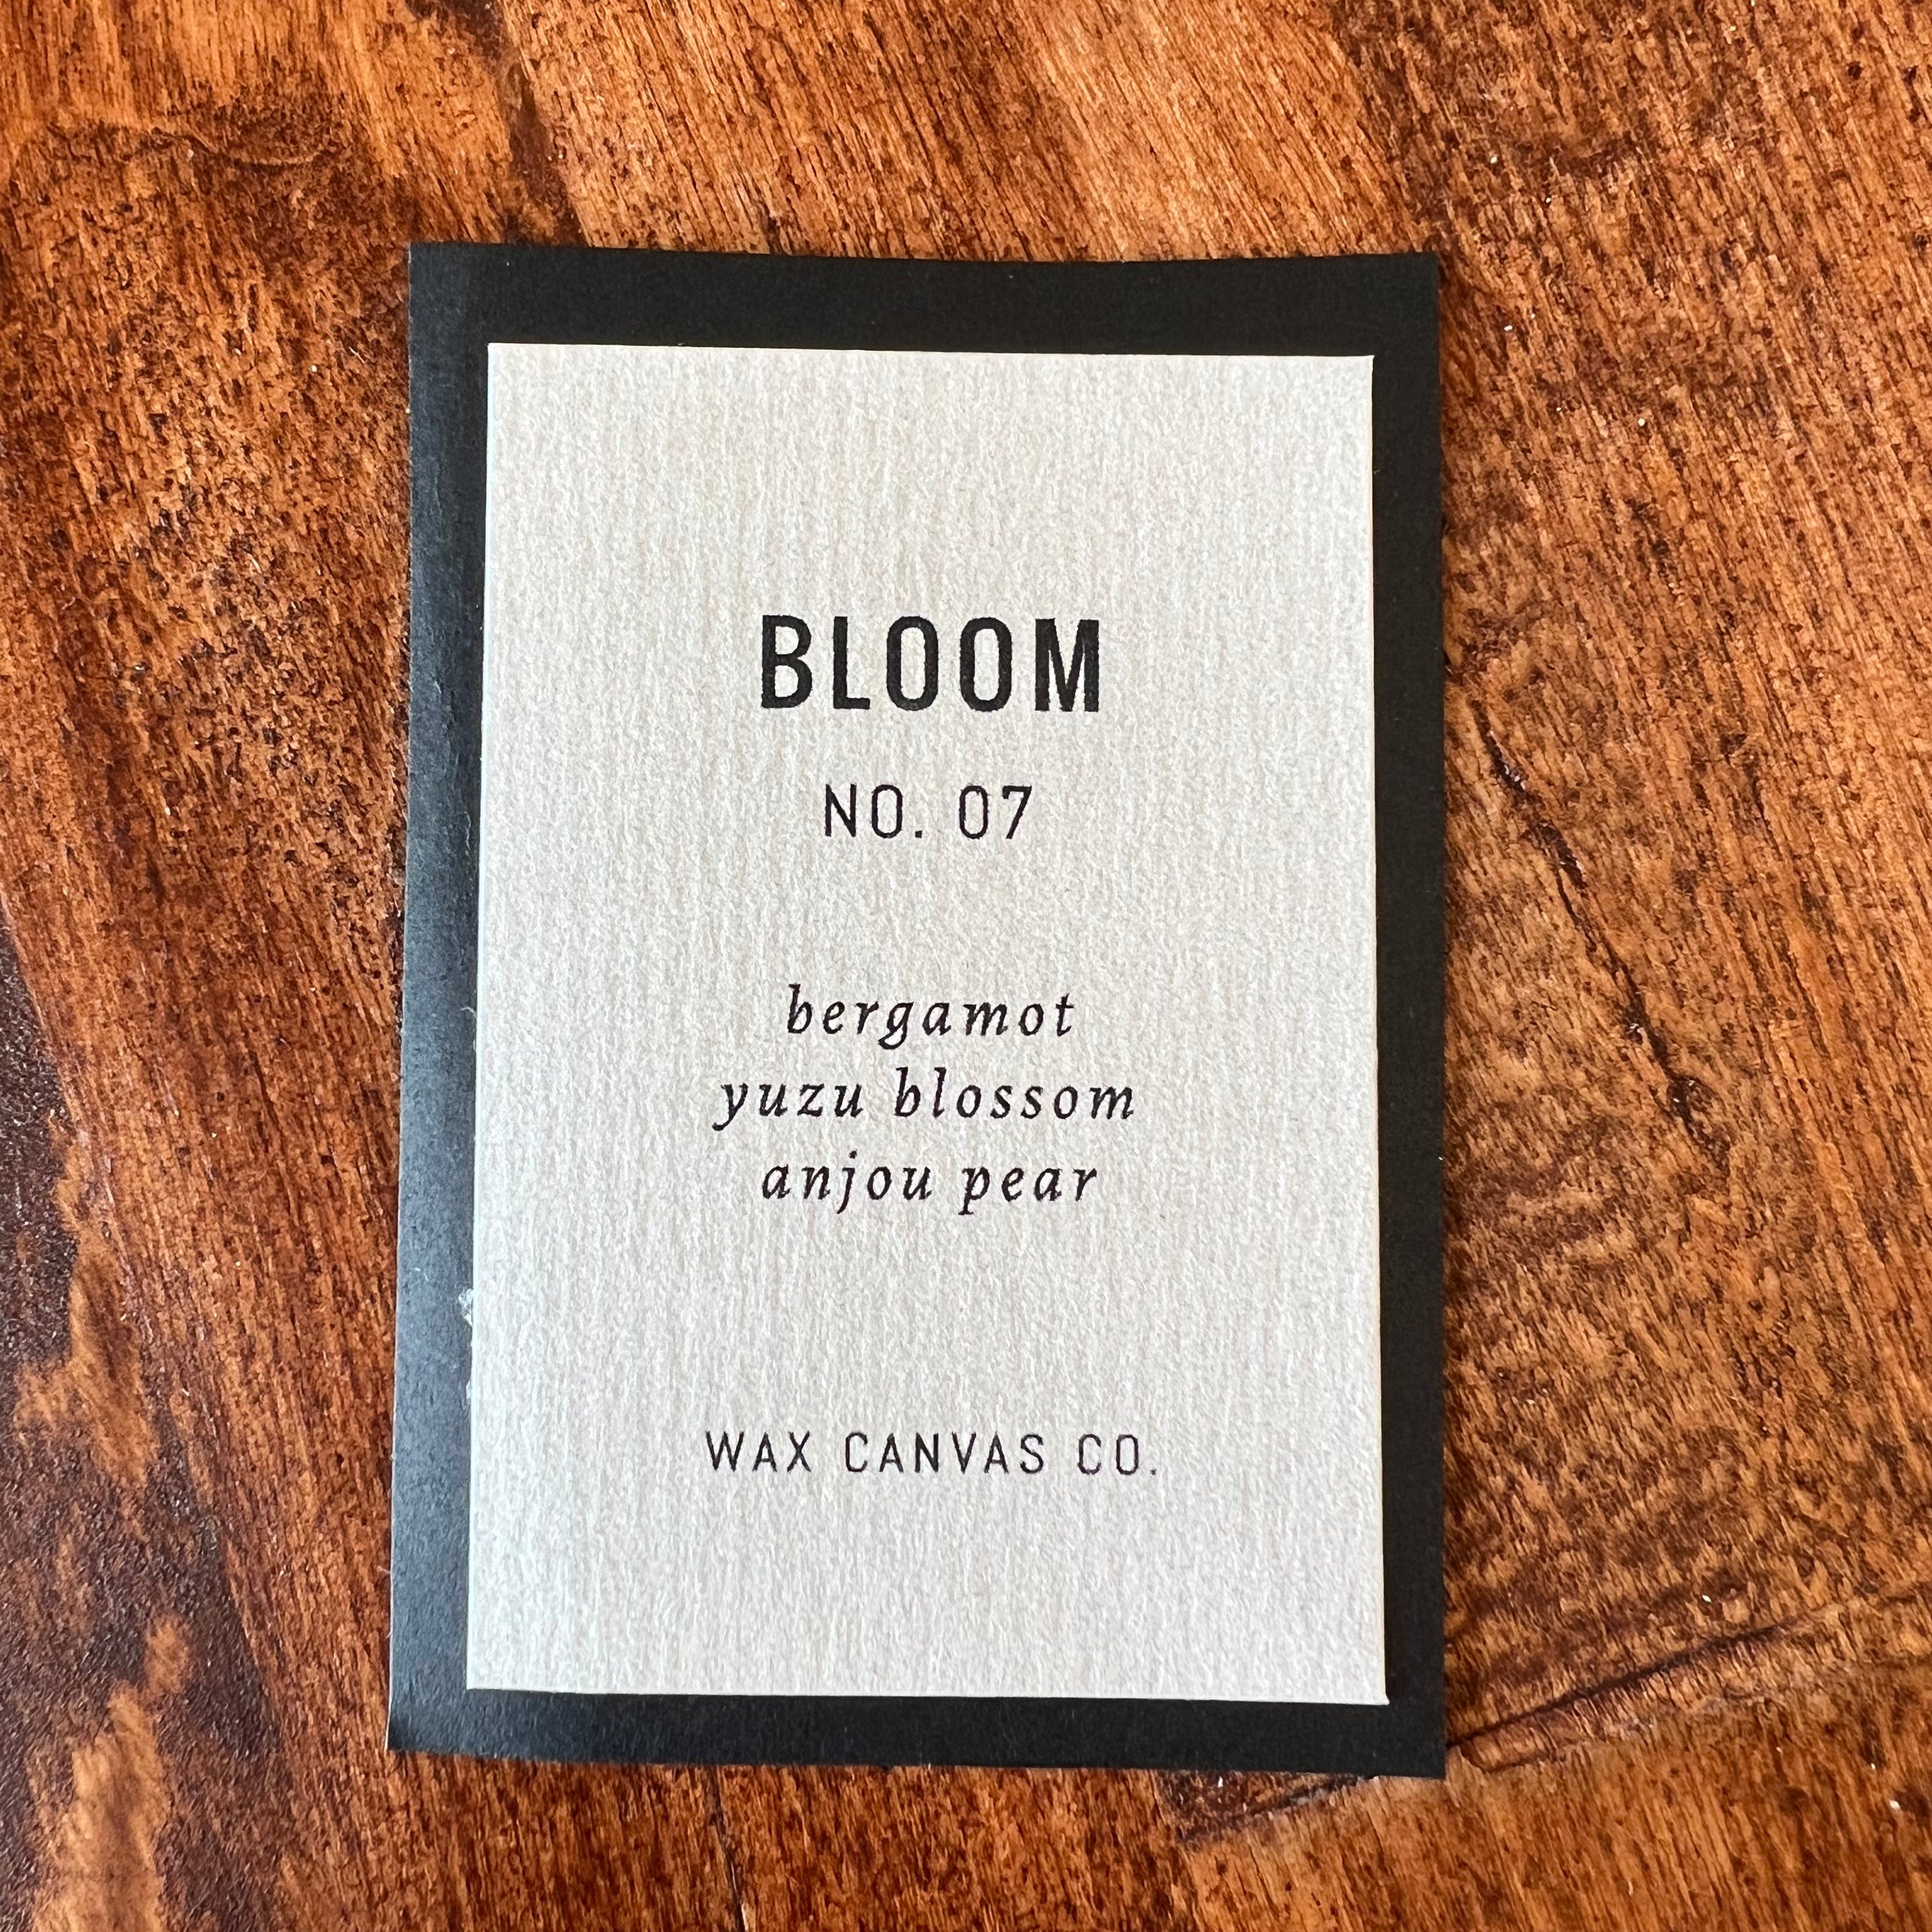 Wax Canvas Co. Perfume Rollers